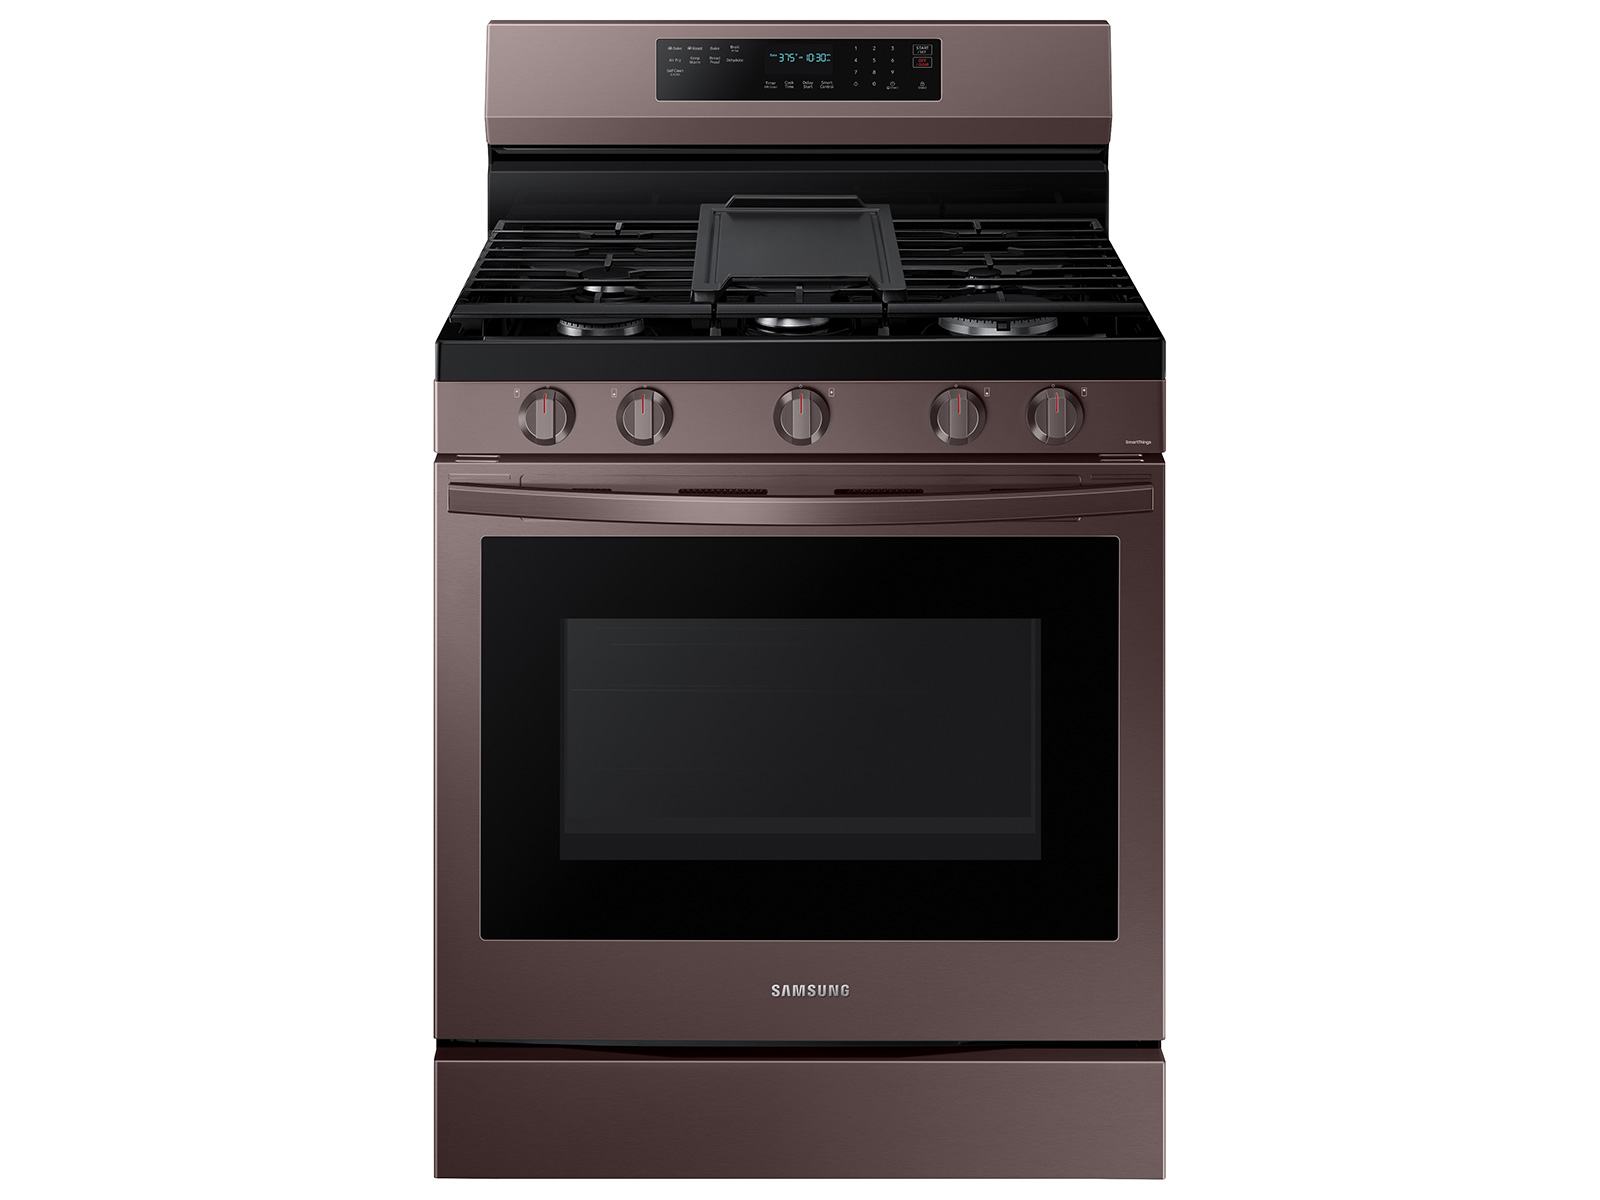 Samsung 6.0 cu. ft. Smart Freestanding Gas Range with No-Preheat Air Fry, Convection+ & Stainless Cooktop in Tuscan Stainless Steel